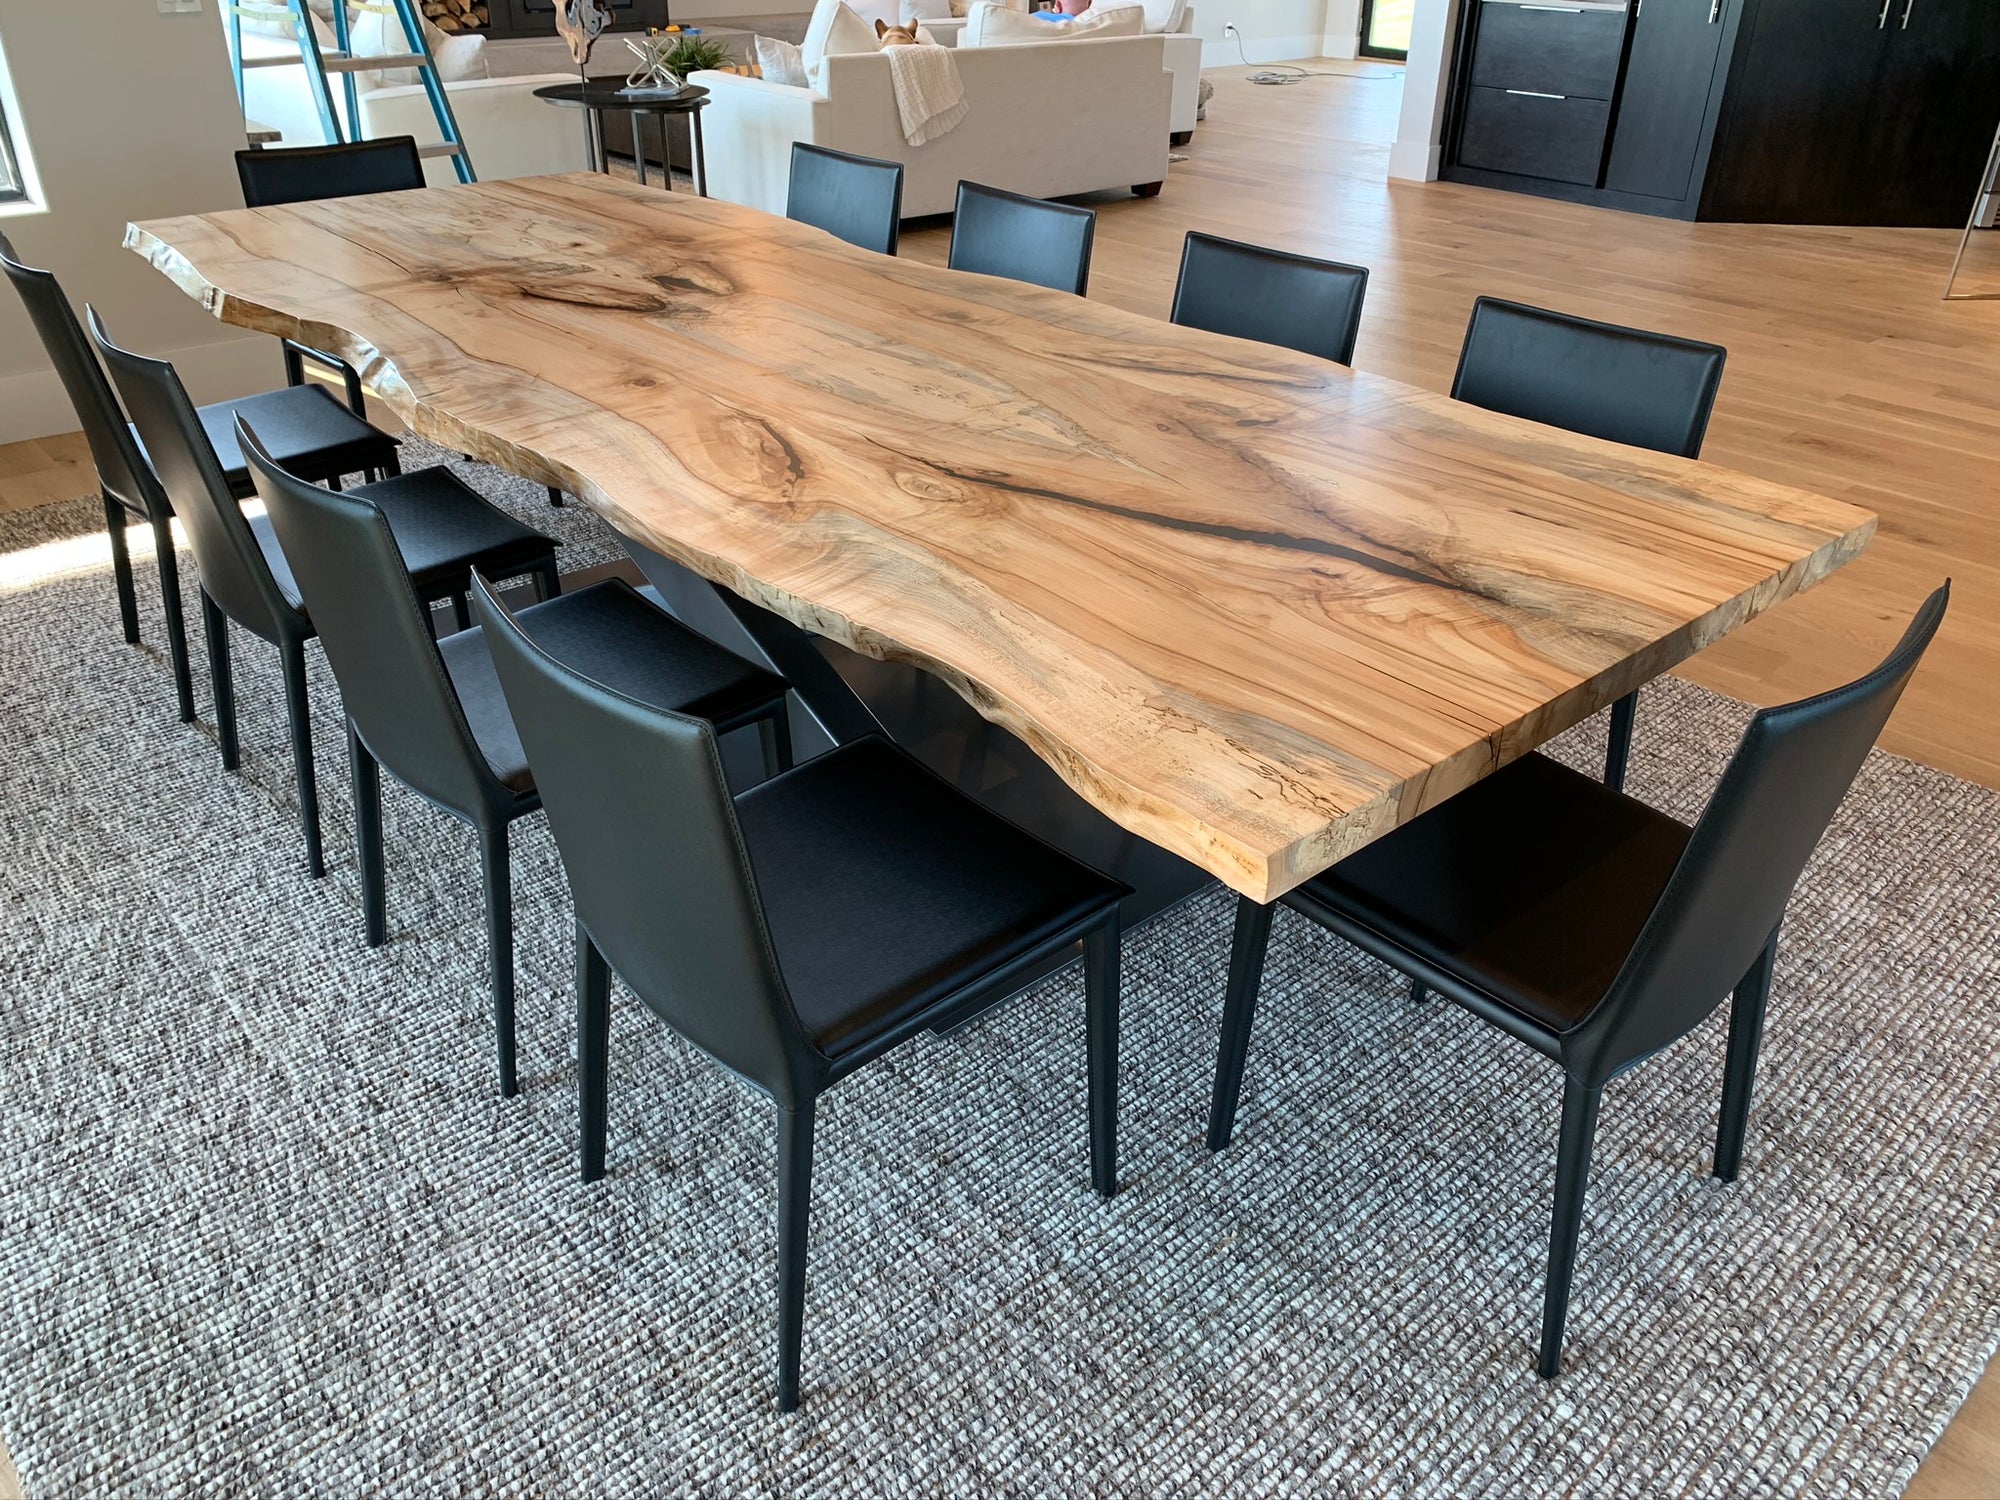 Live edge maple dining table